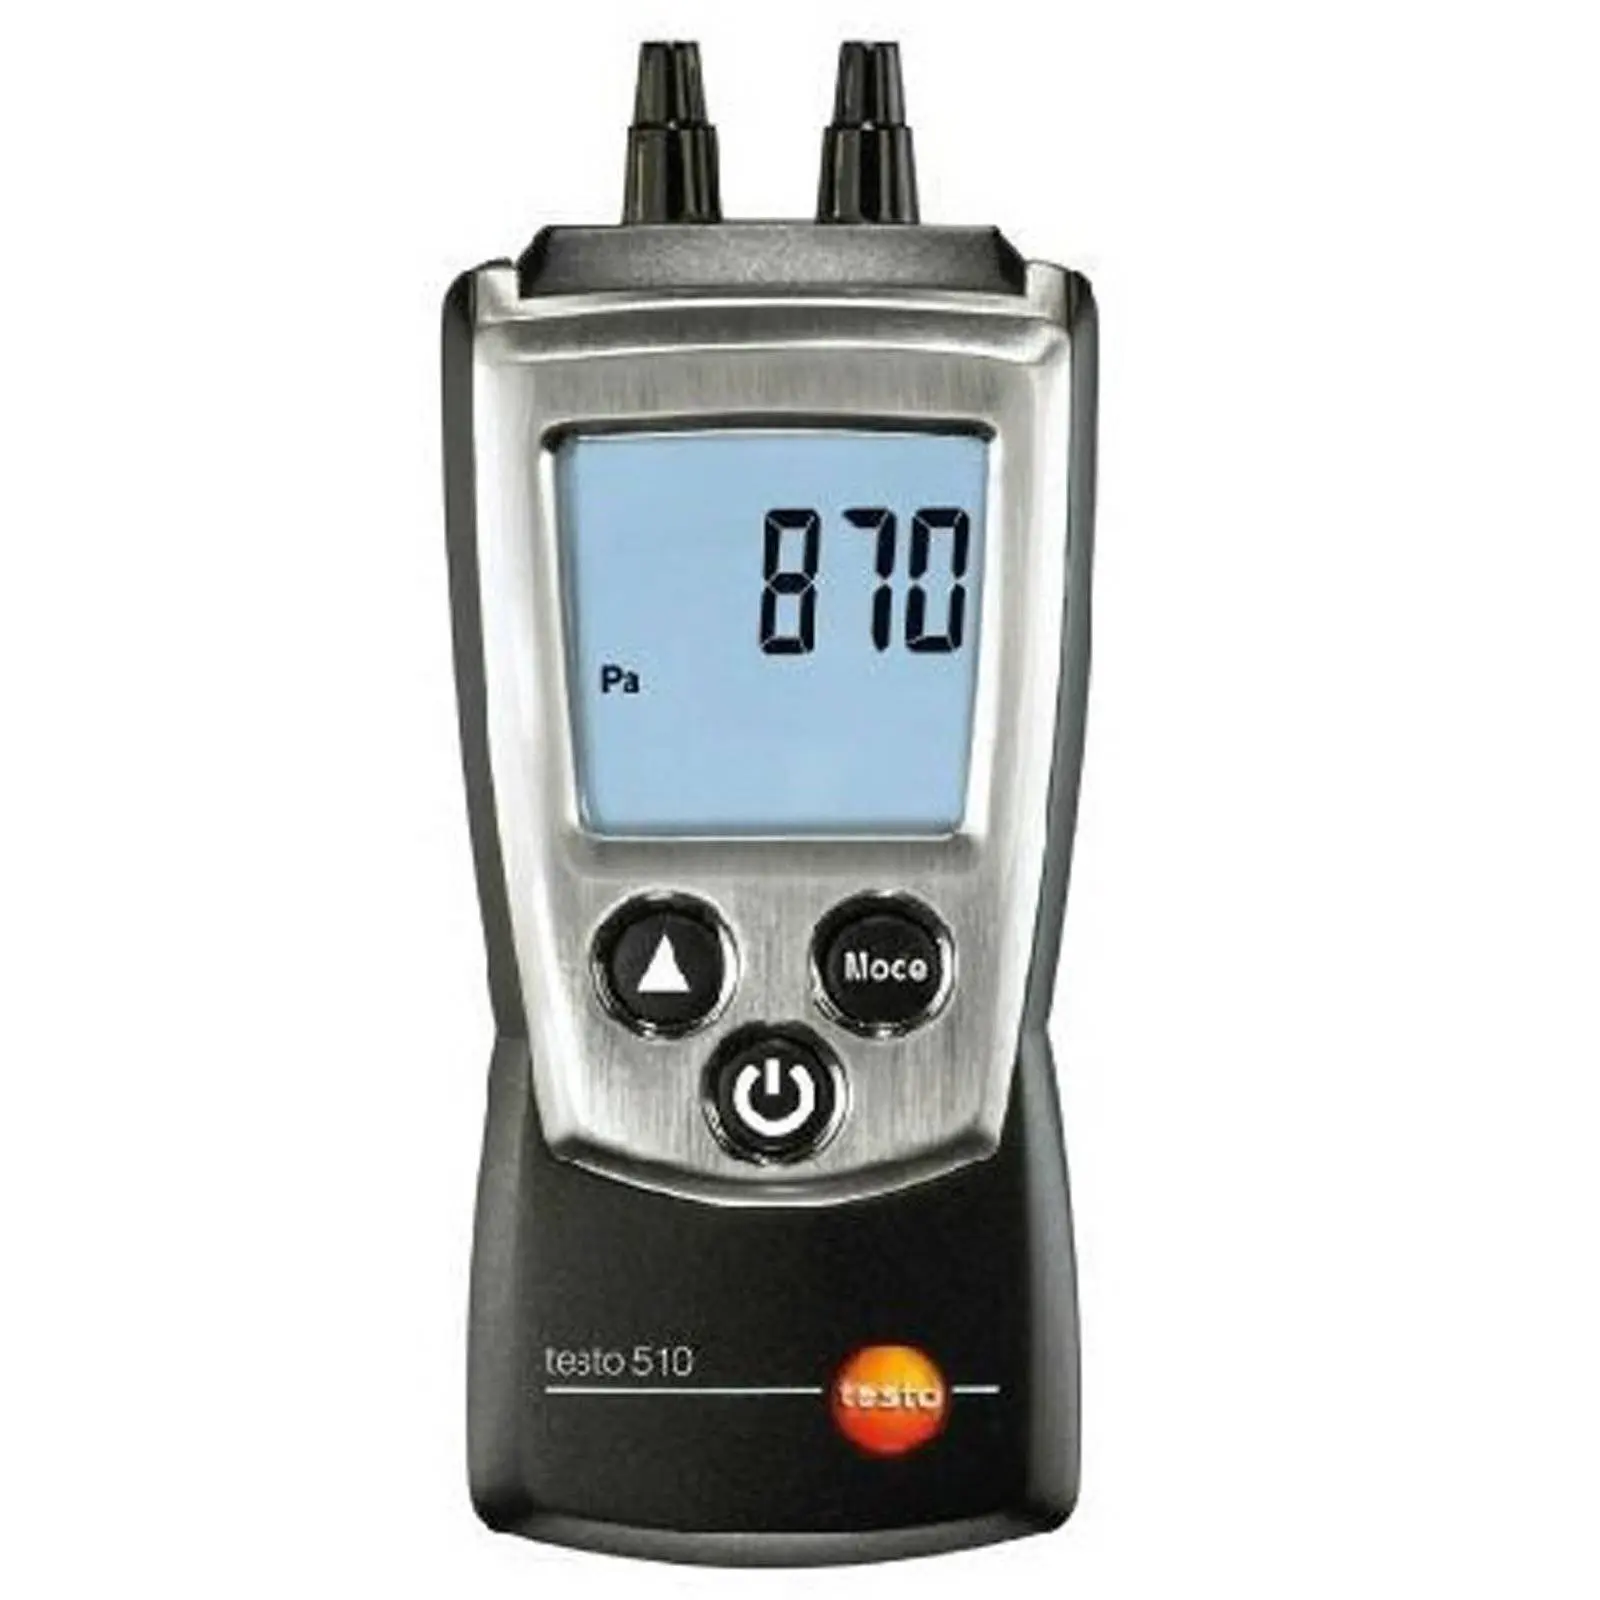 testo 510 set (Order-Nr. 0563 0510) - 0 to 100 hPa differential pressure measuring instrument